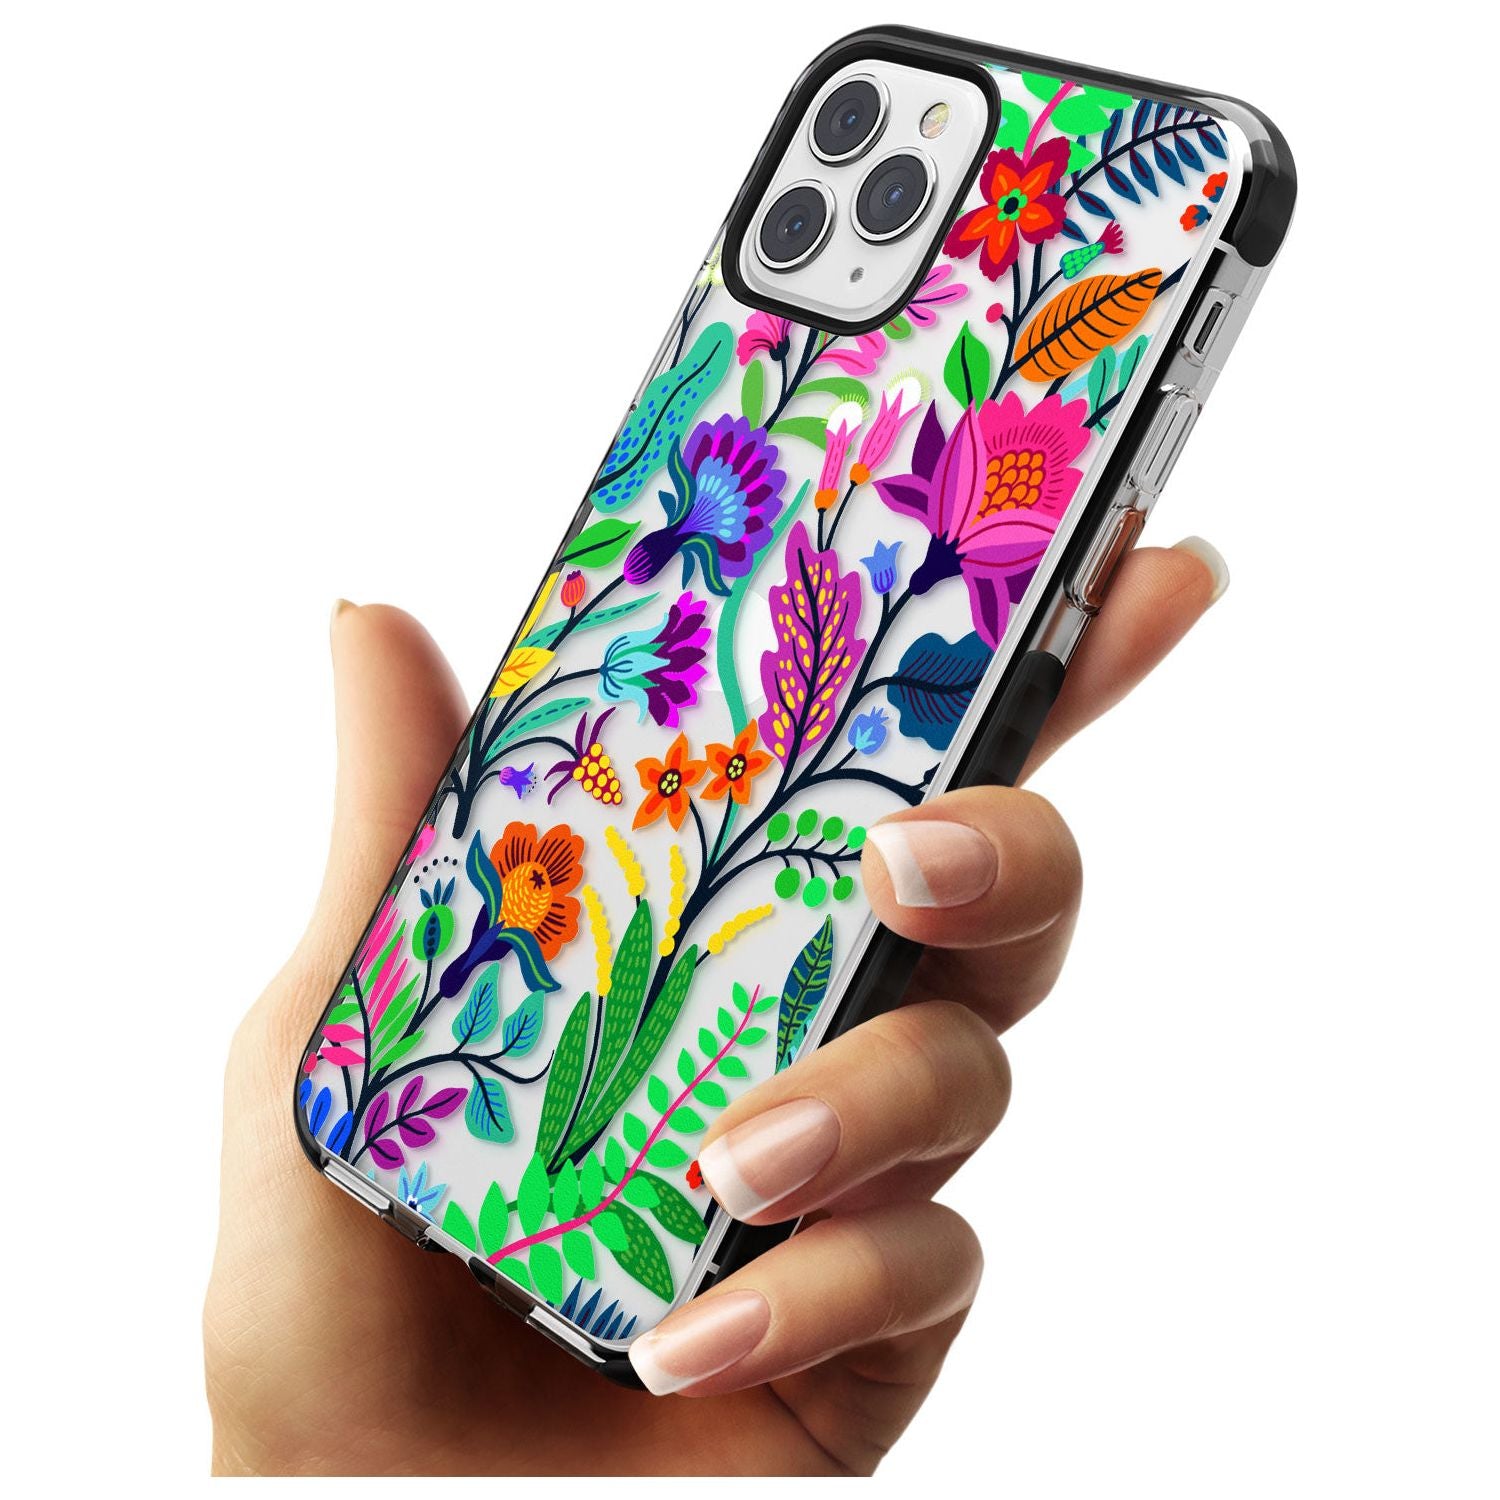 Floral Vibe Black Impact Phone Case for iPhone 11